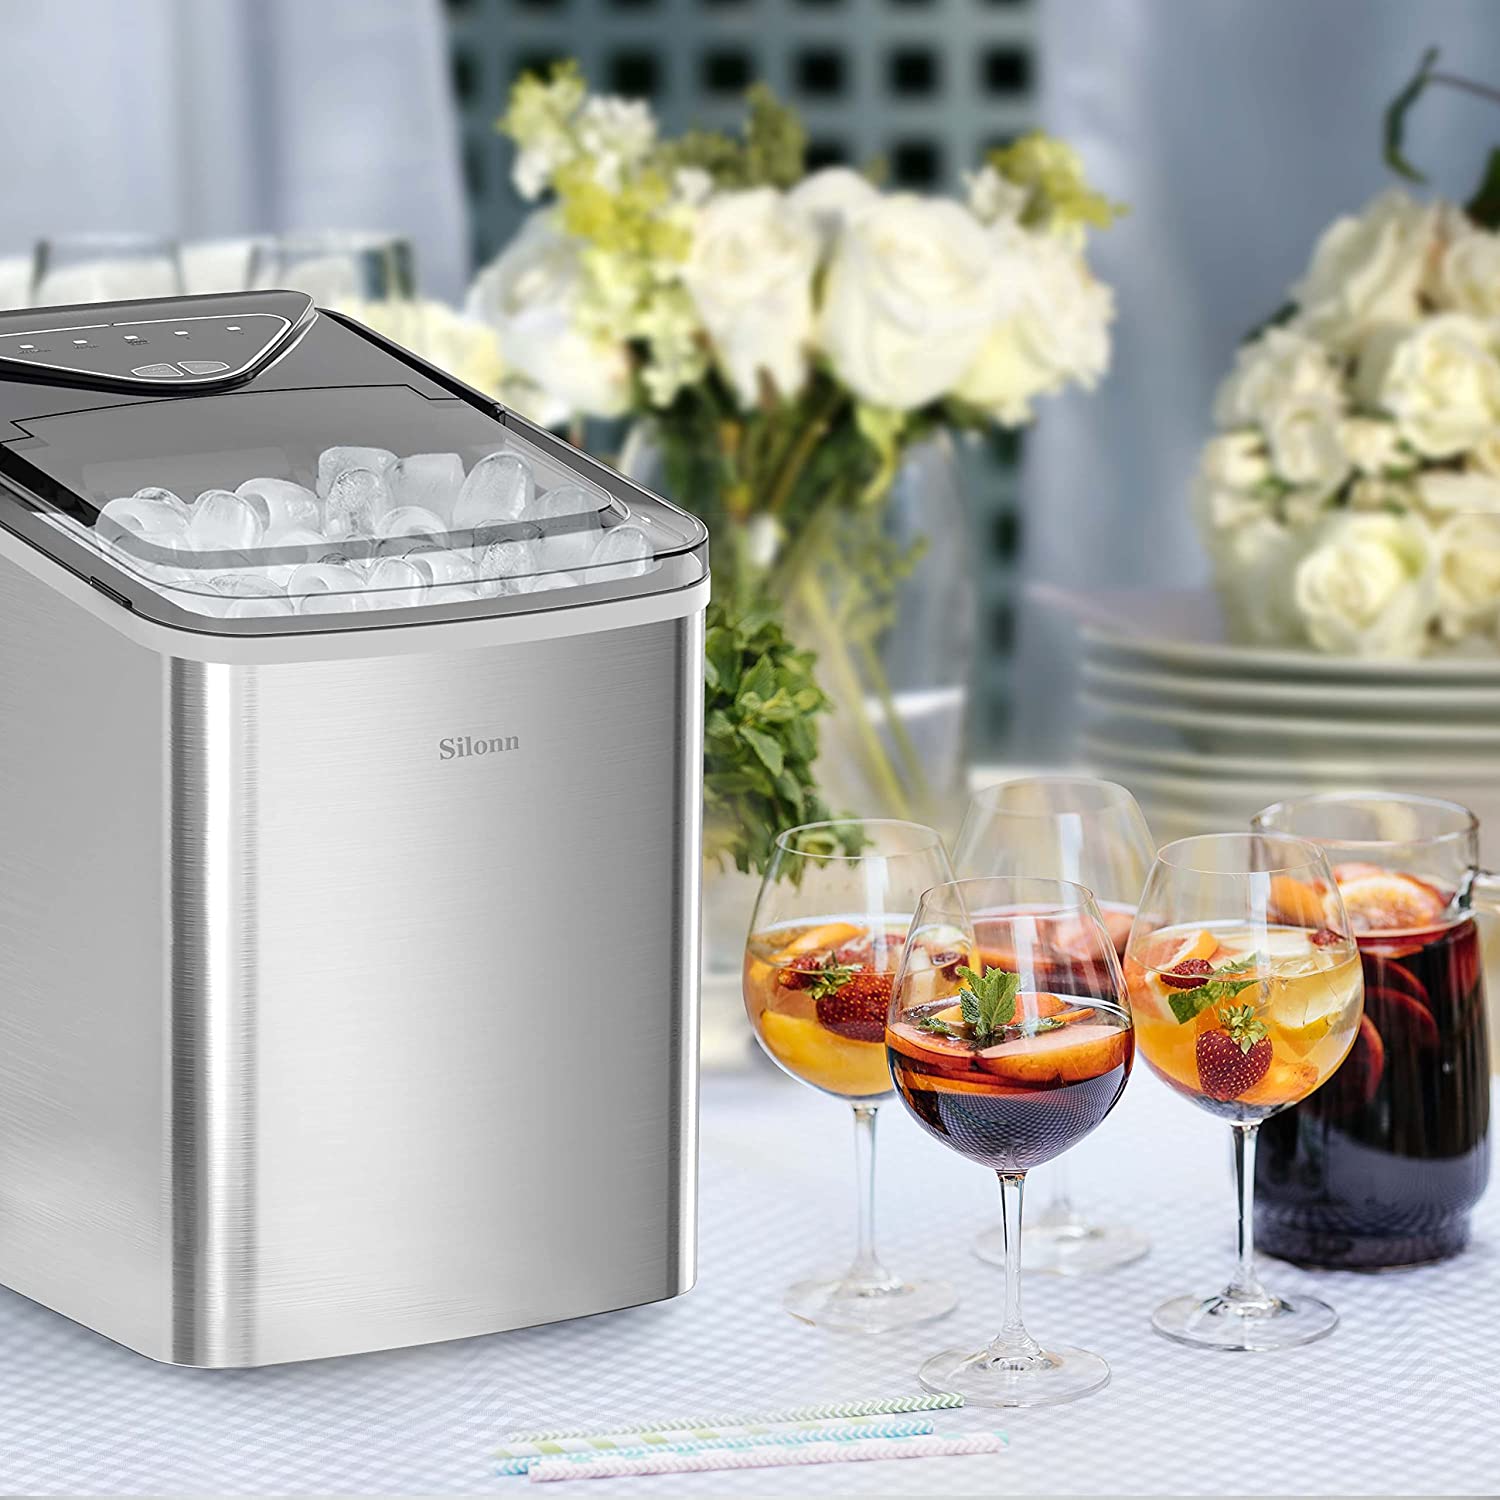 Countertop Ice Maker Machine, Compact Portable Ice Makers Countertop, 26Lbs/24H, 9 Cubes in 6 Mins, Self-Cleaning Ice Maker 2 Sizes of Bullet-Shaped